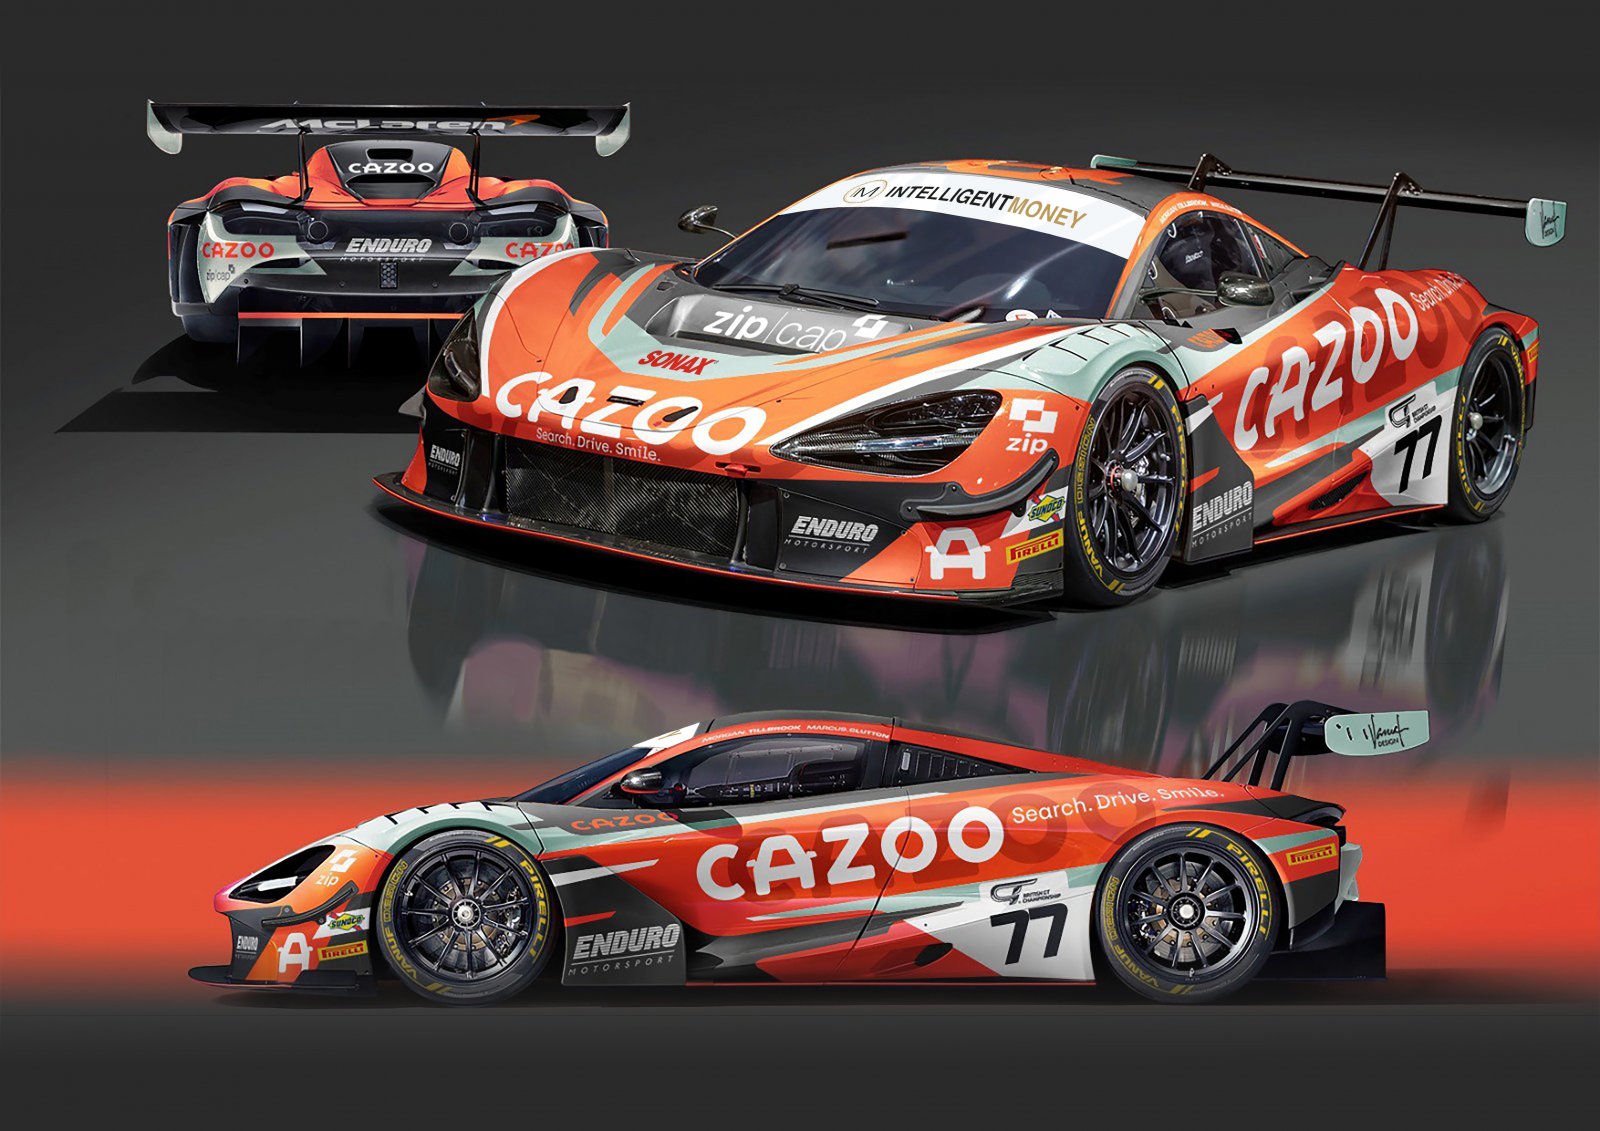 The Enduro Motorsport McLaren has been upgraded to Evo spec and given a new look ahead of the new season.